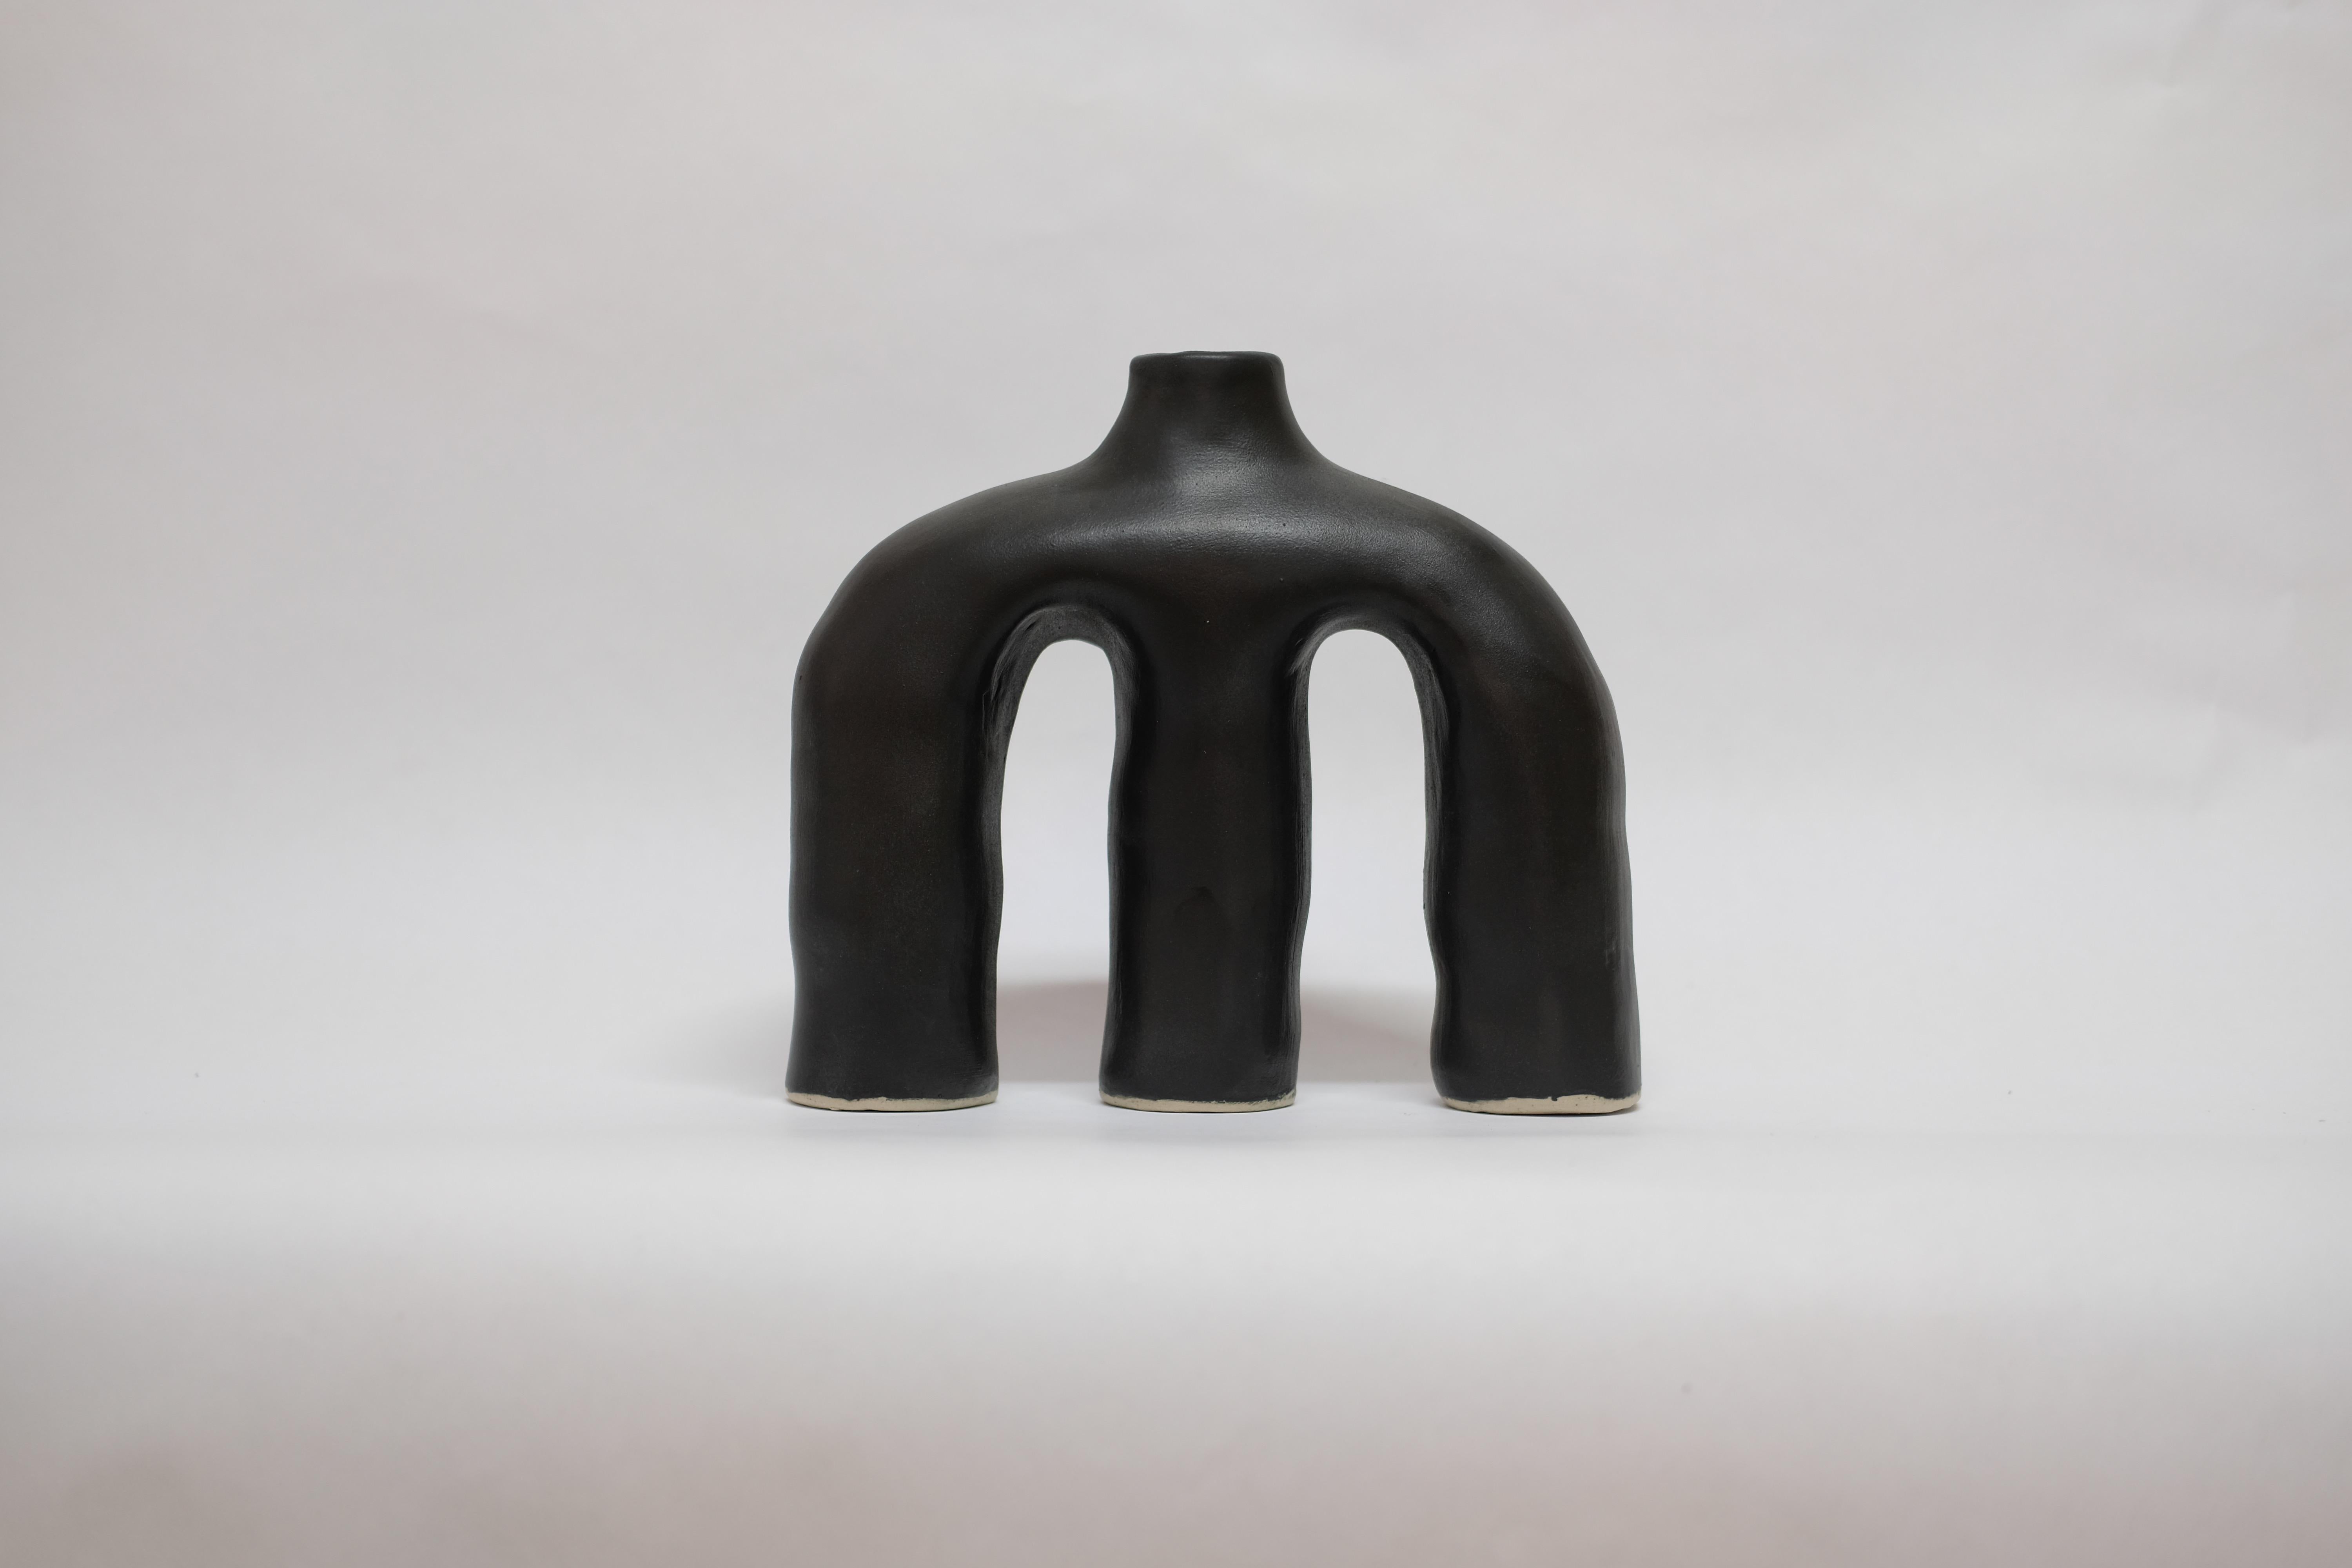 Black Anatomía Sutil stoneware vase by Camila Apaez
One of a kind
Materials: Stoneware
Dimensions: 25 x 8 x 22 cm
Options: white bone, butter milk, charcoal black

This year has been shaped by the topographies of our homes and the uncertainty